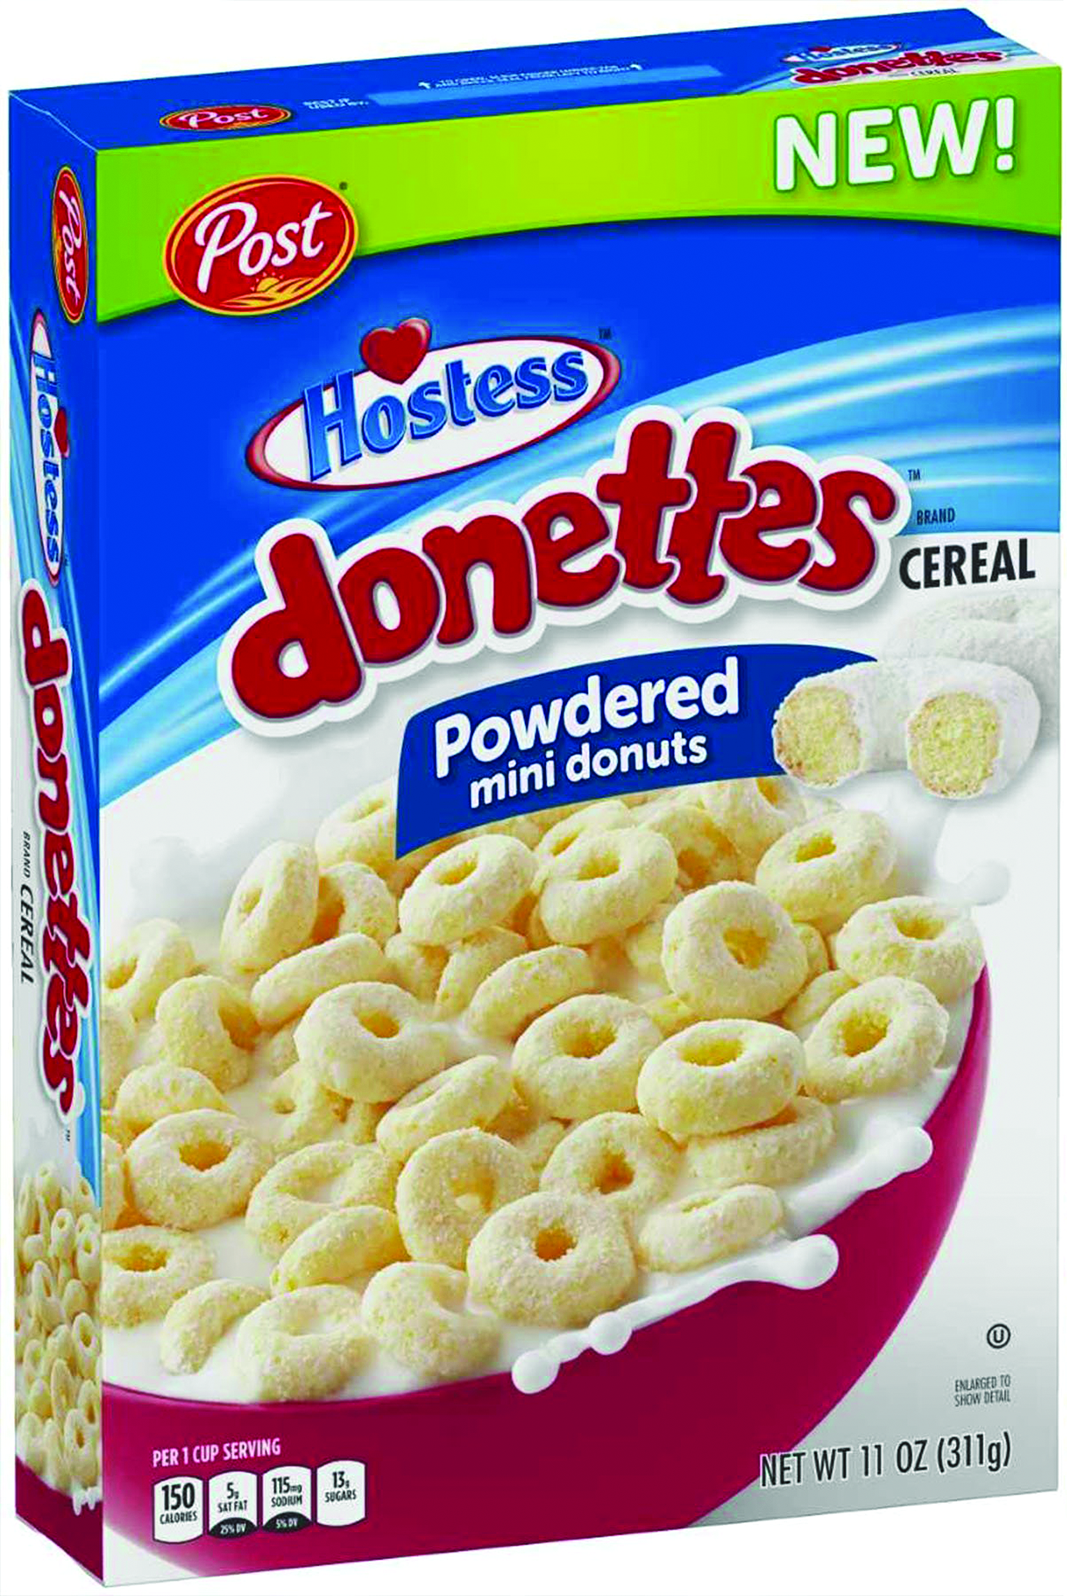 Hostess donettes cereal